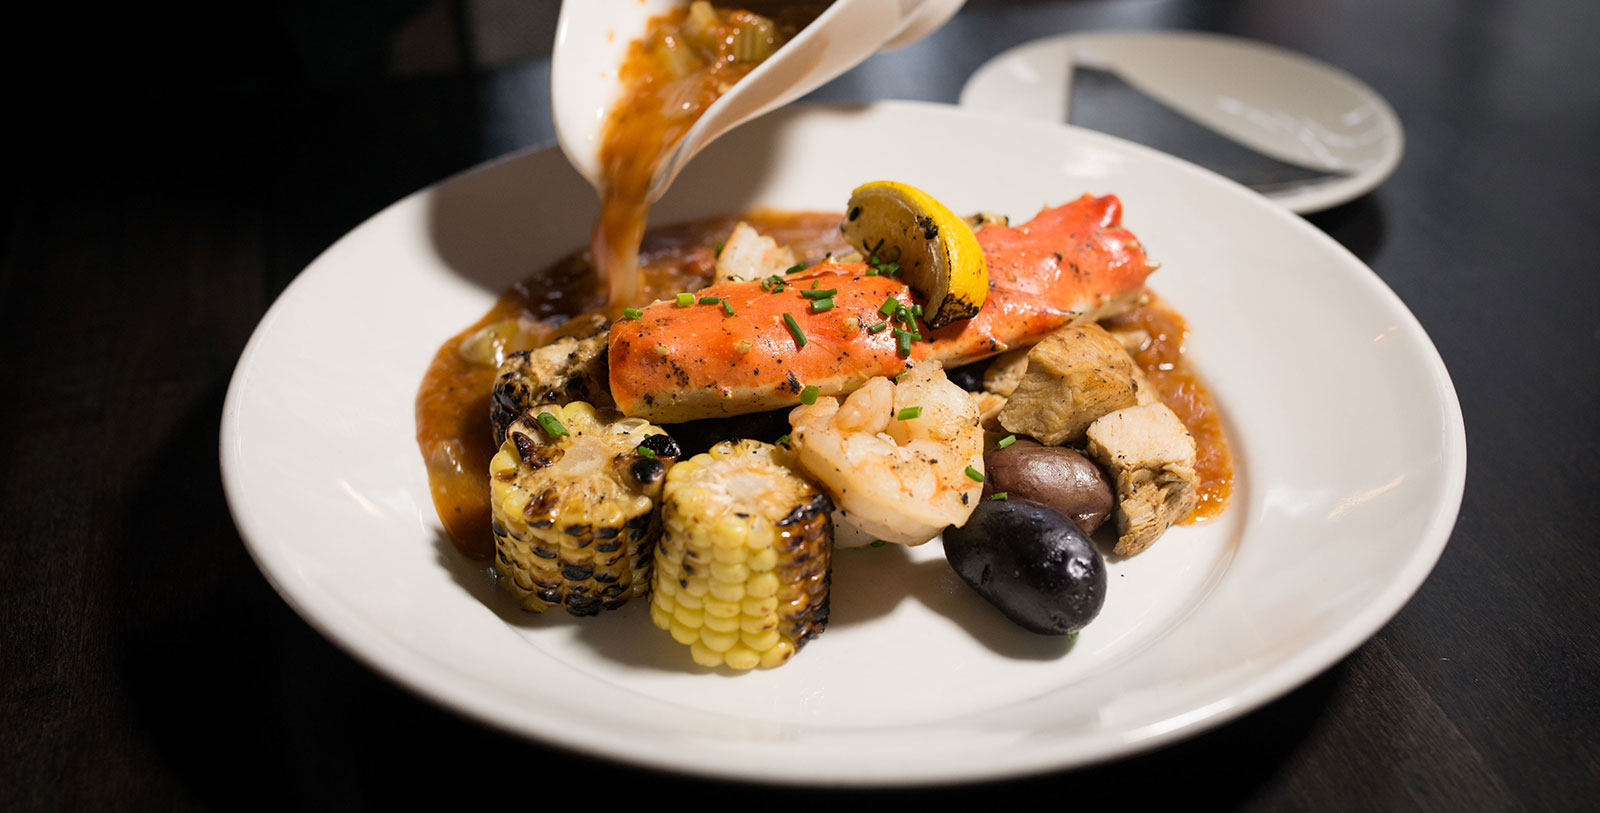 Taste authentic southern flavors with an unforgettable culinary experience at Livingston Restaurant & Bar.